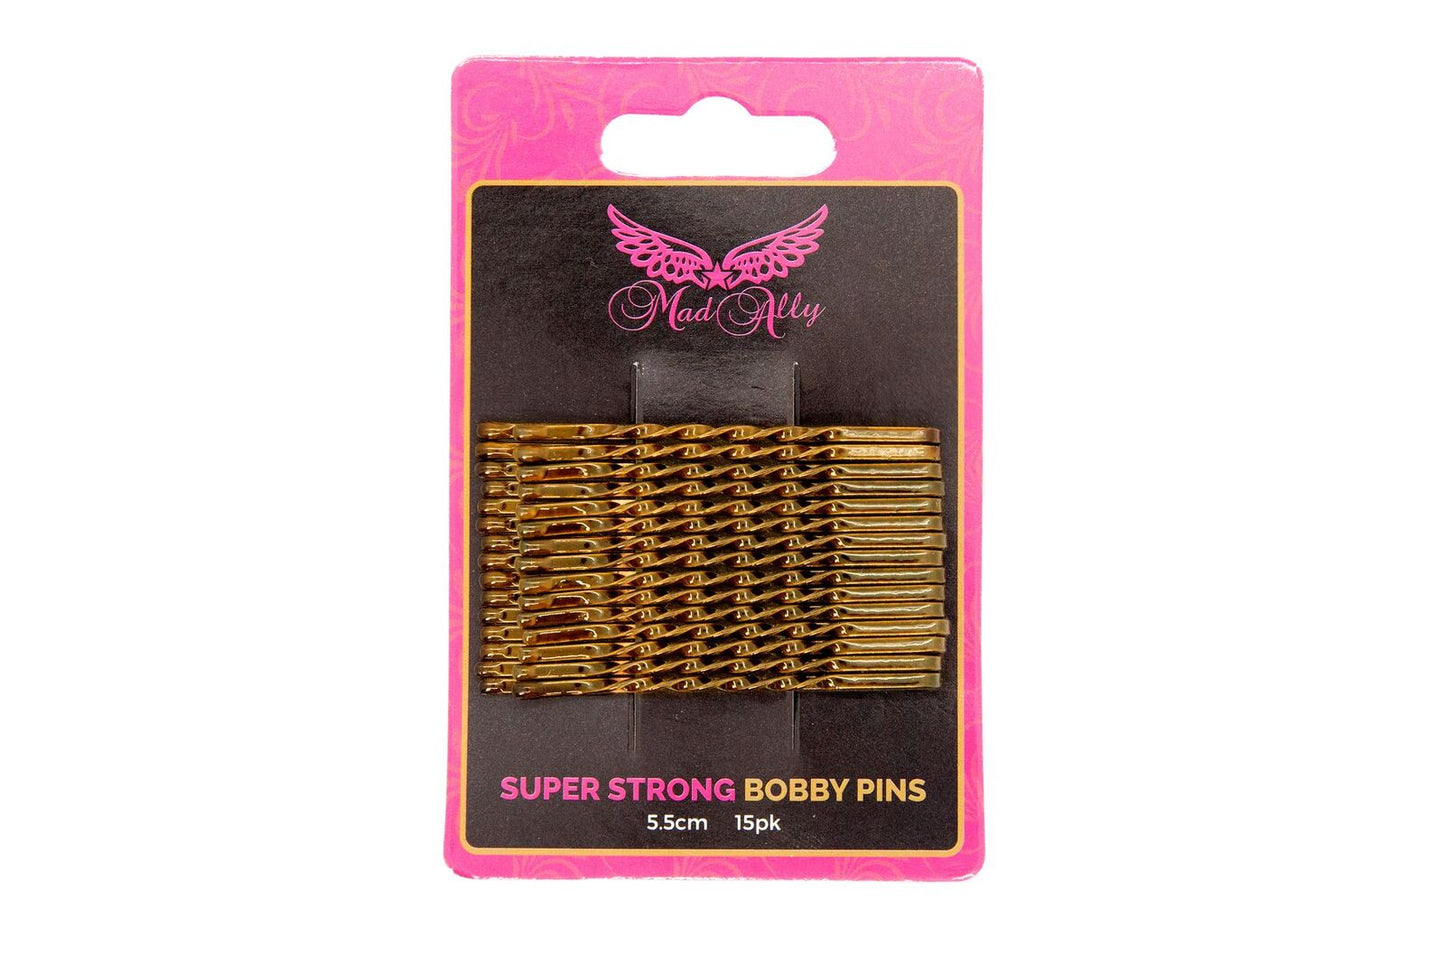 Mad Ally Super Strong Bobby Pins - Blonde